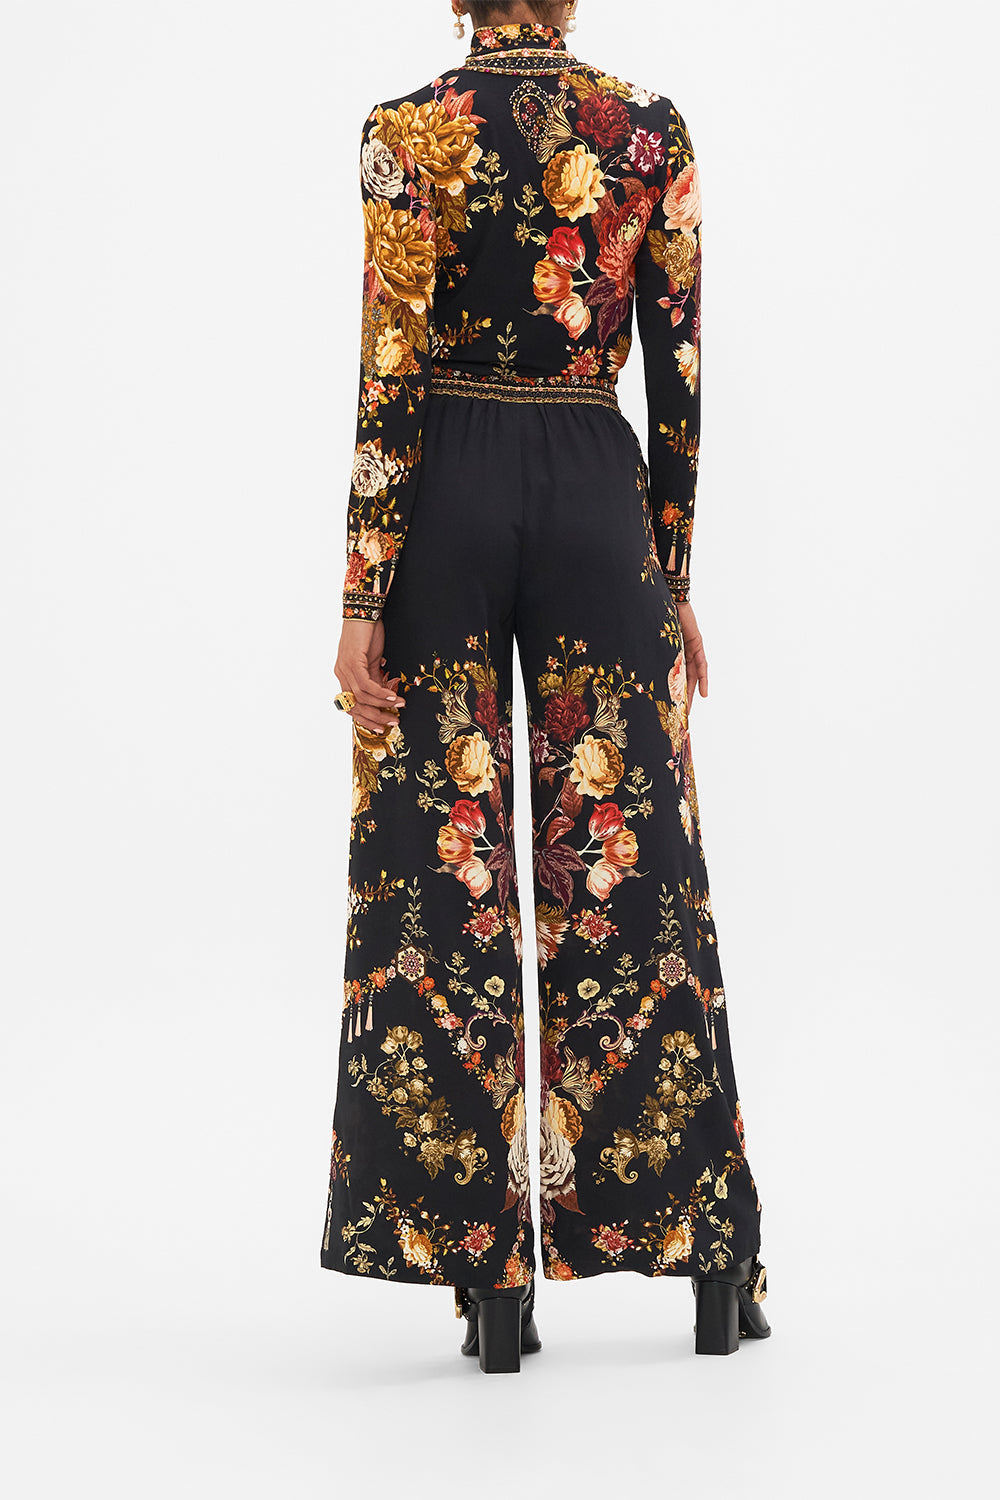 CAMILLA Floral Lounge Pant in Stitched in Time